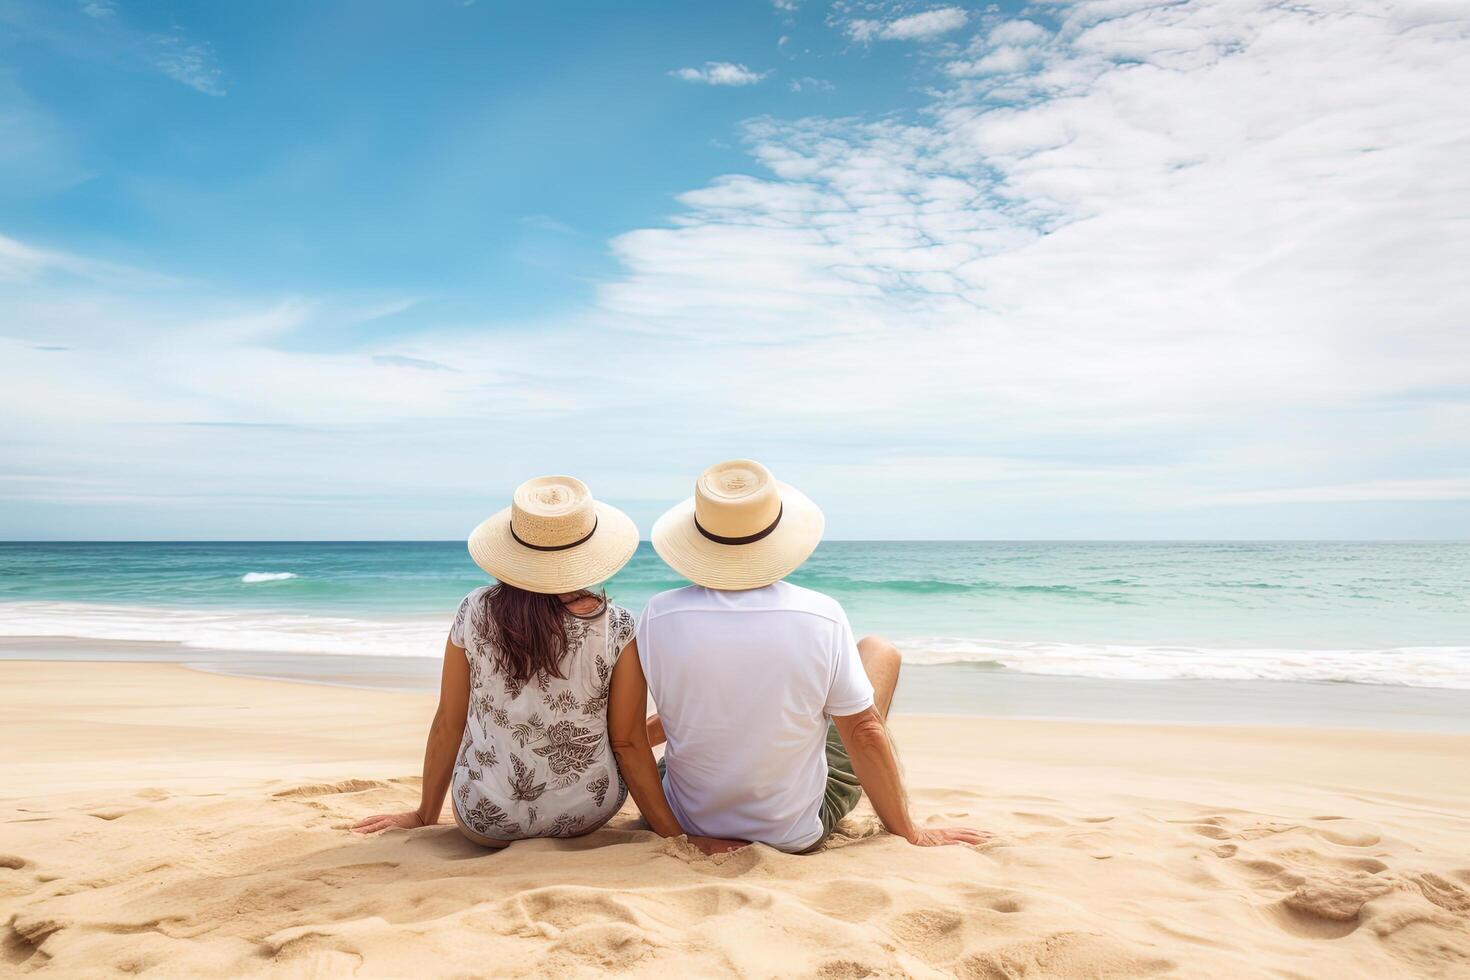 a couple sitting on a beach. sweet couple happy relax enjoy love and romantic moment. photo